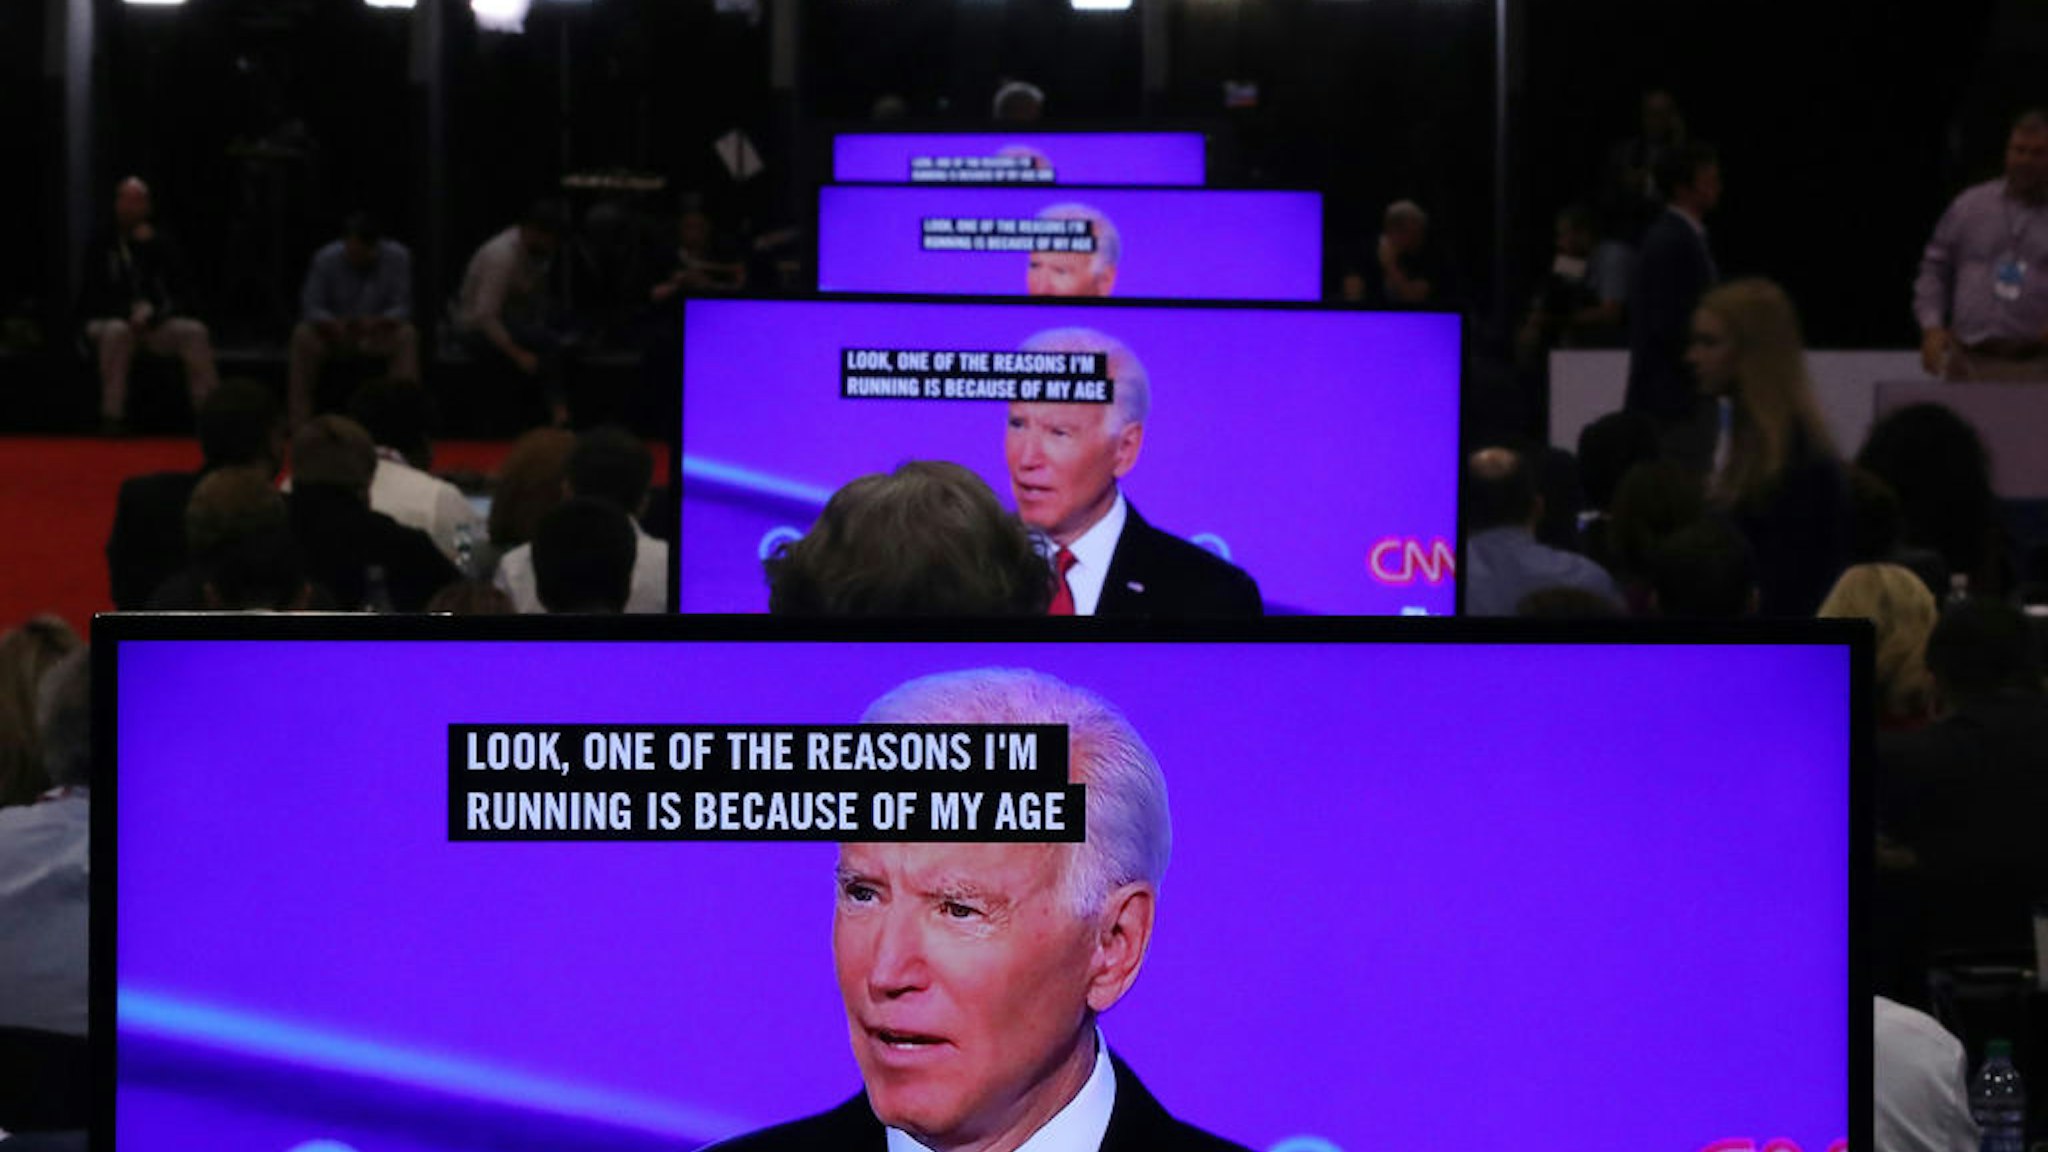 Former Vice President Joe Biden appears on television screens in the Media Center during the Democratic Presidential Debate at Otterbein University on October 15, 2019 in Westerville, Ohio. A record 12 presidential hopefuls are participating in the debate hosted by CNN and The New York Times. (Photo by Chip Somodevilla/Getty Images)